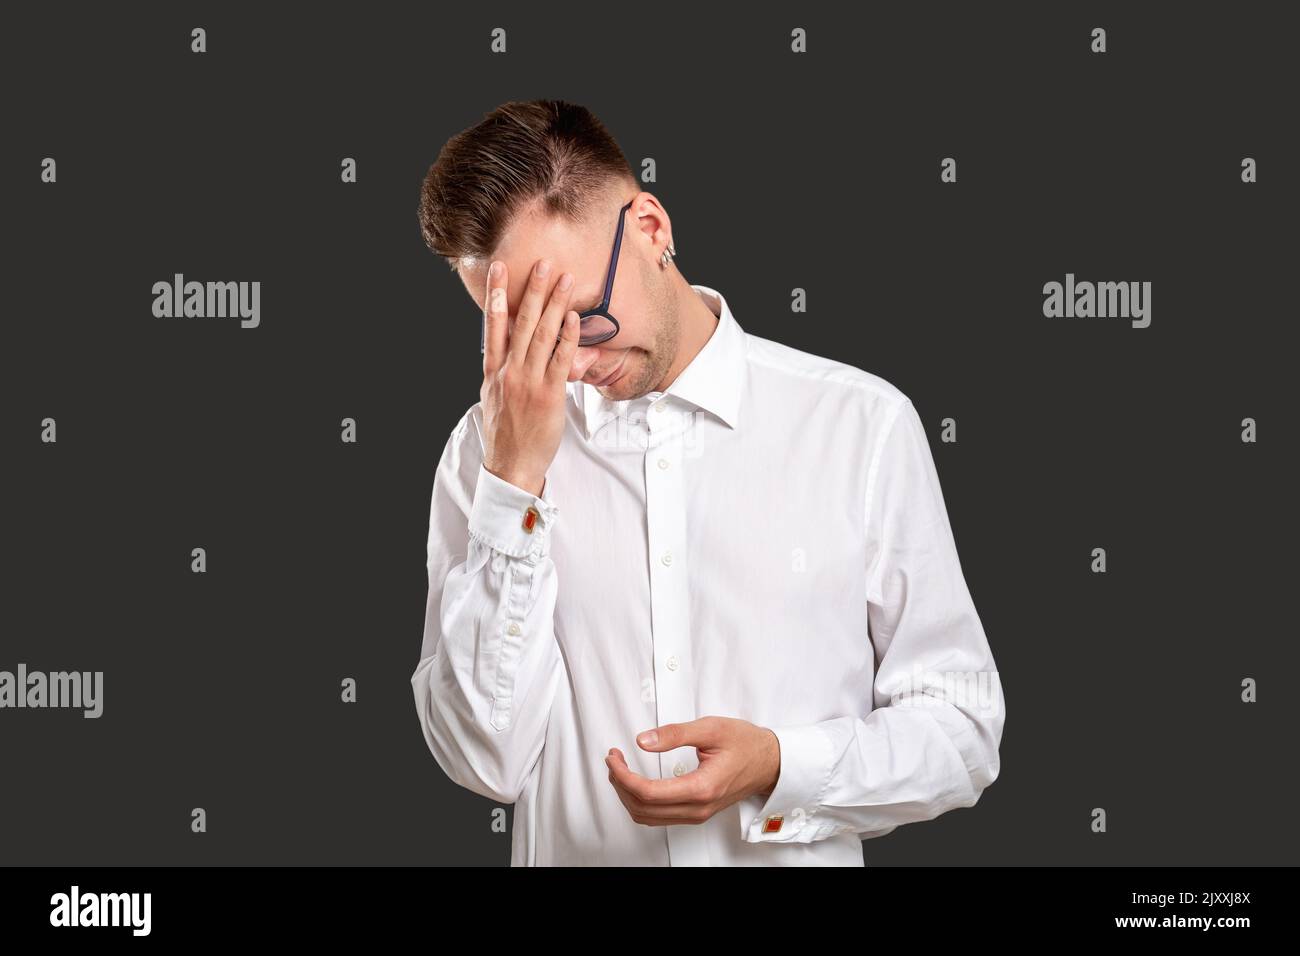 disappointed man portrait facepalm gesture skeptic Stock Photo